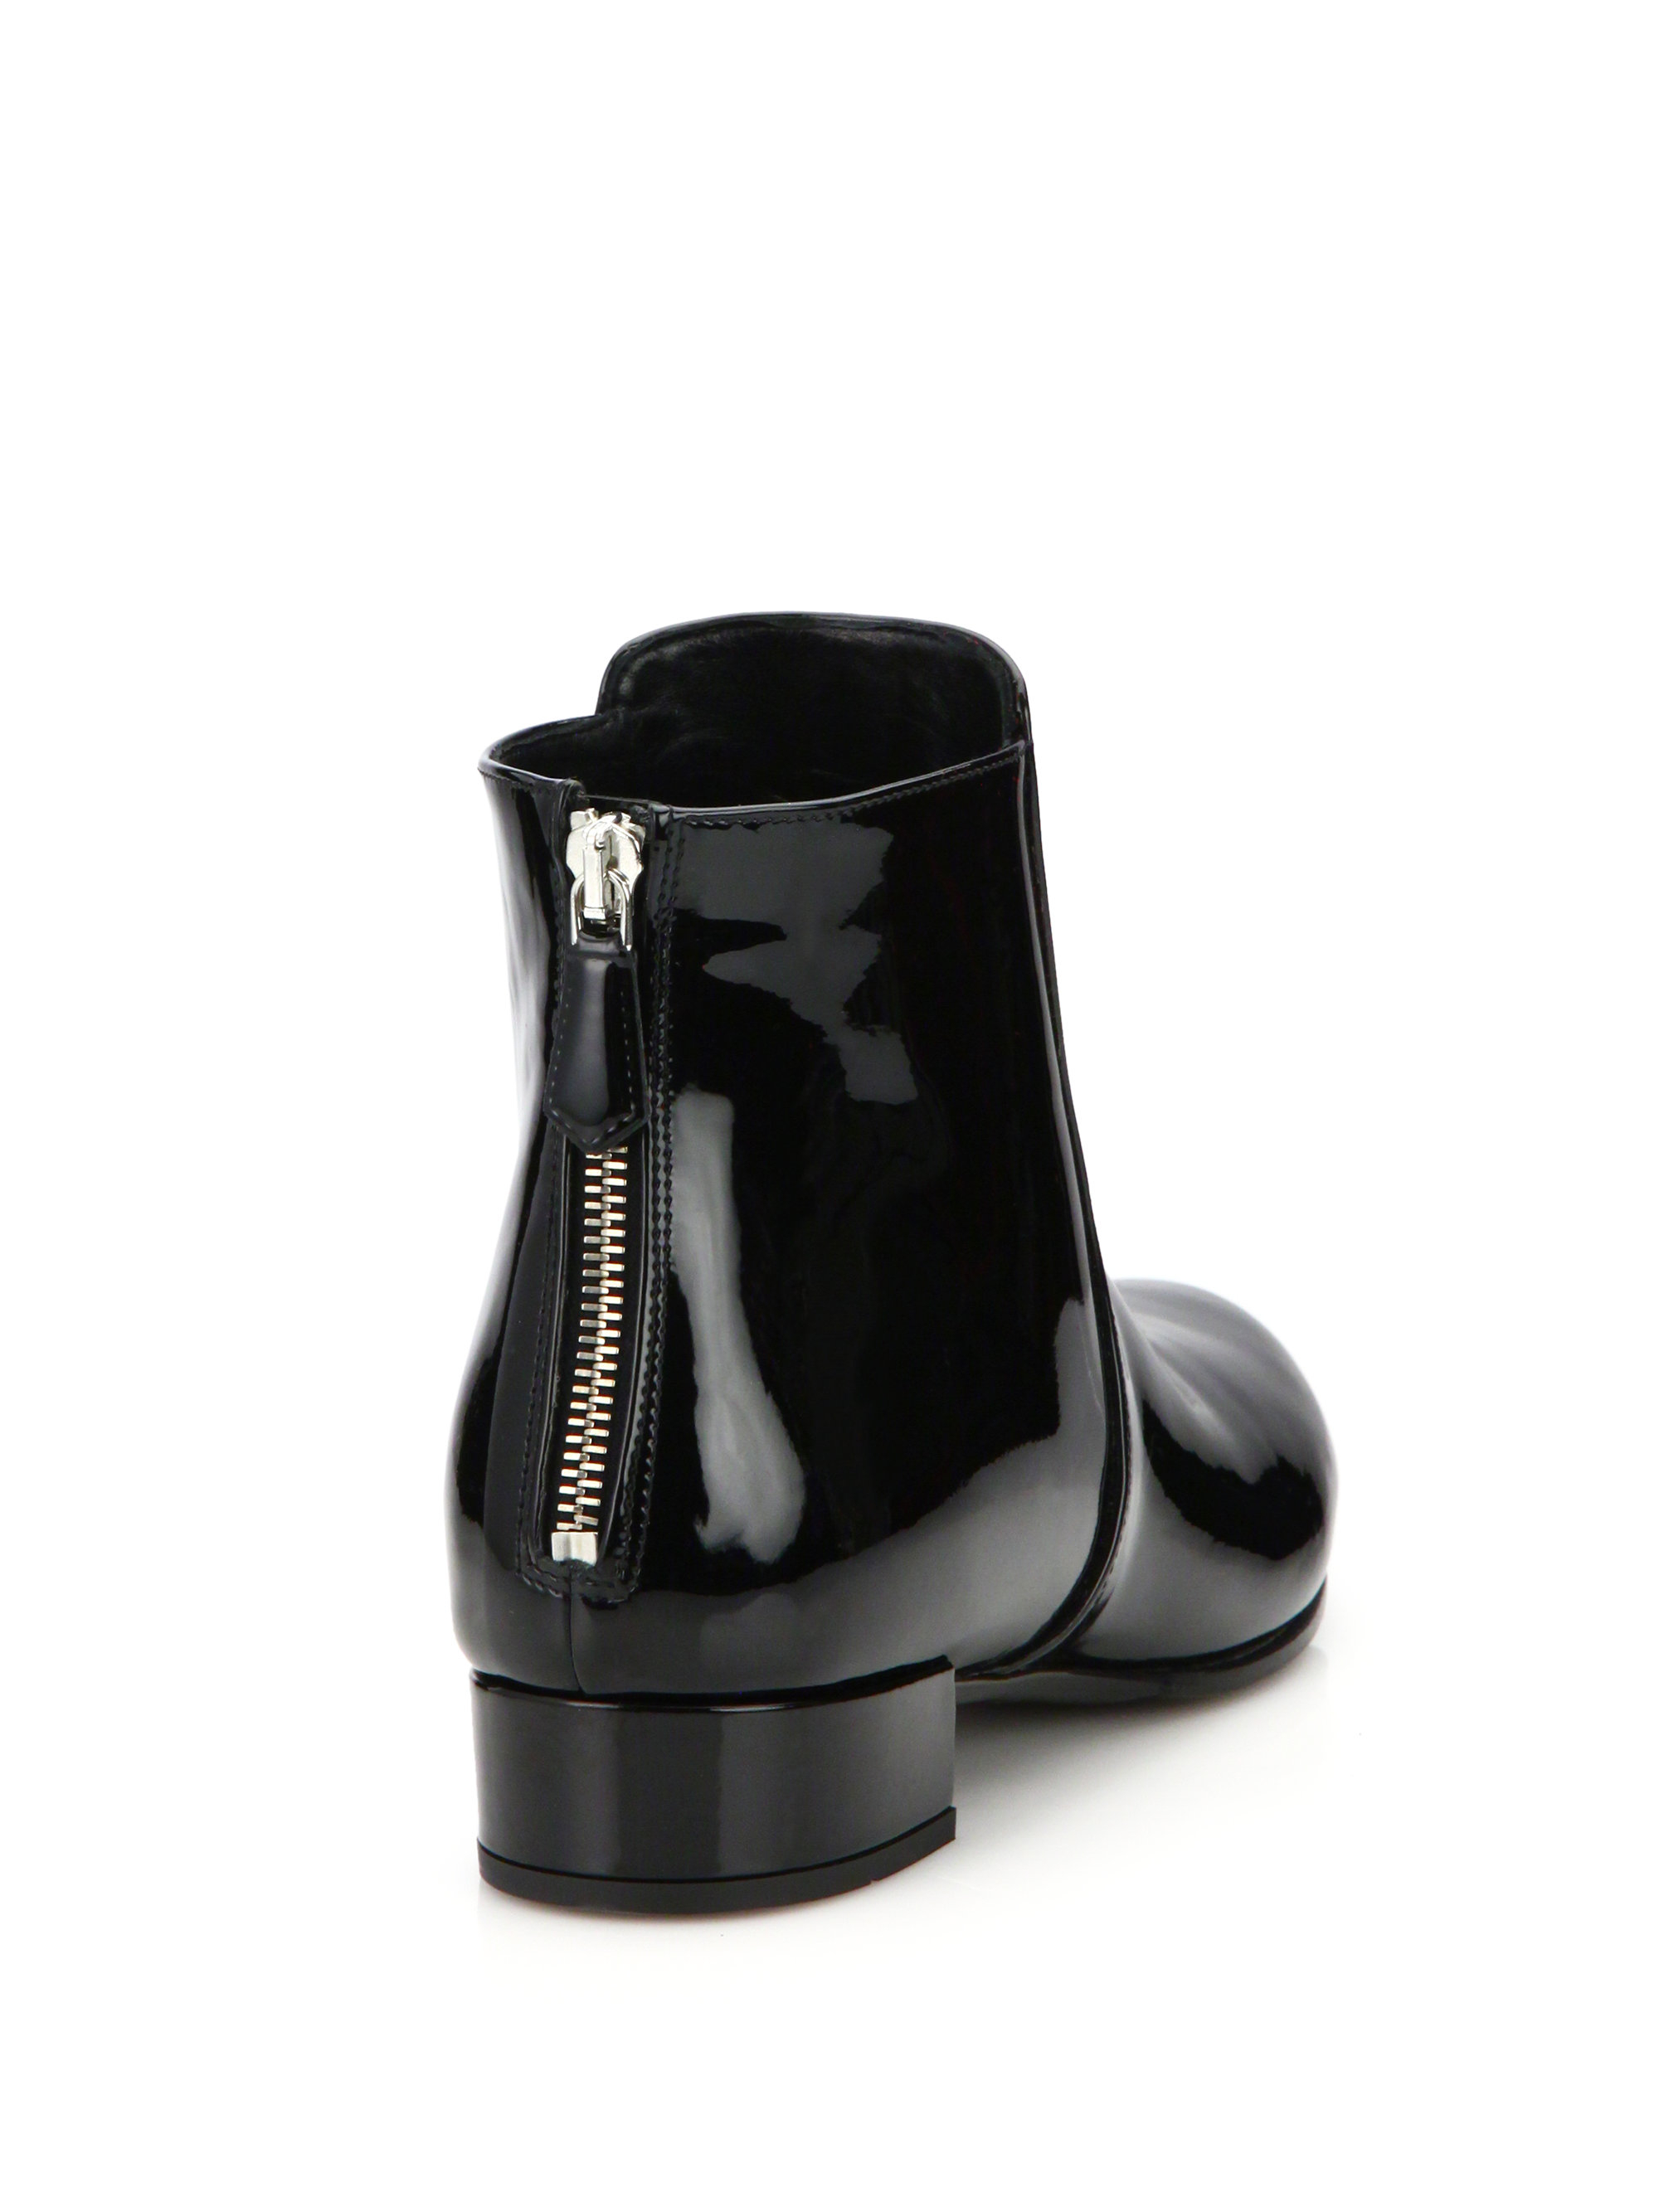 Prada Patent Leather Flat Ankle Boots in Black | Lyst